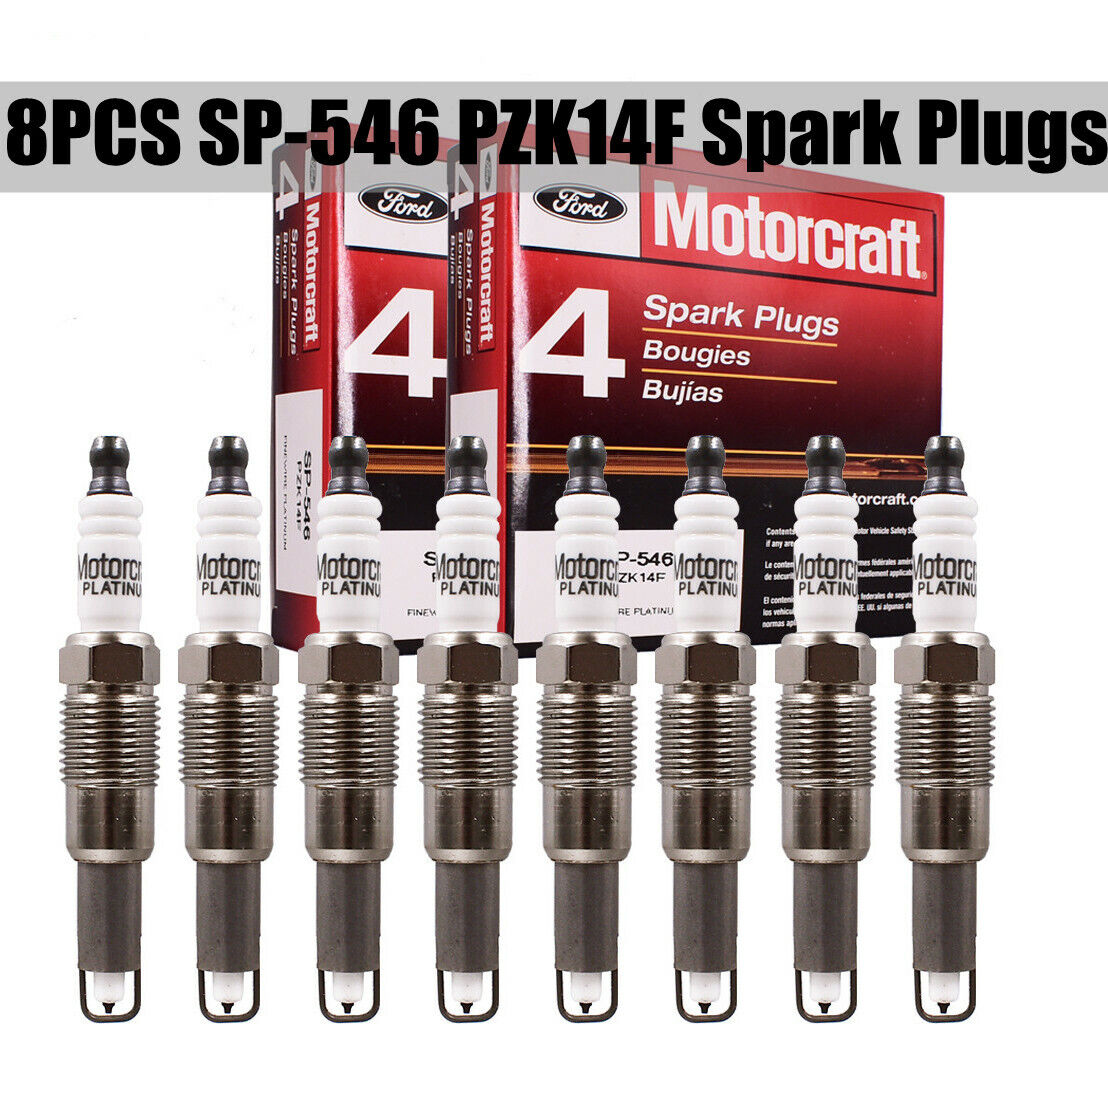 8Pcs Spark Plugs SP-546 PZK14F Genuine New For Ford F150 F250 Motorcraft  SP546